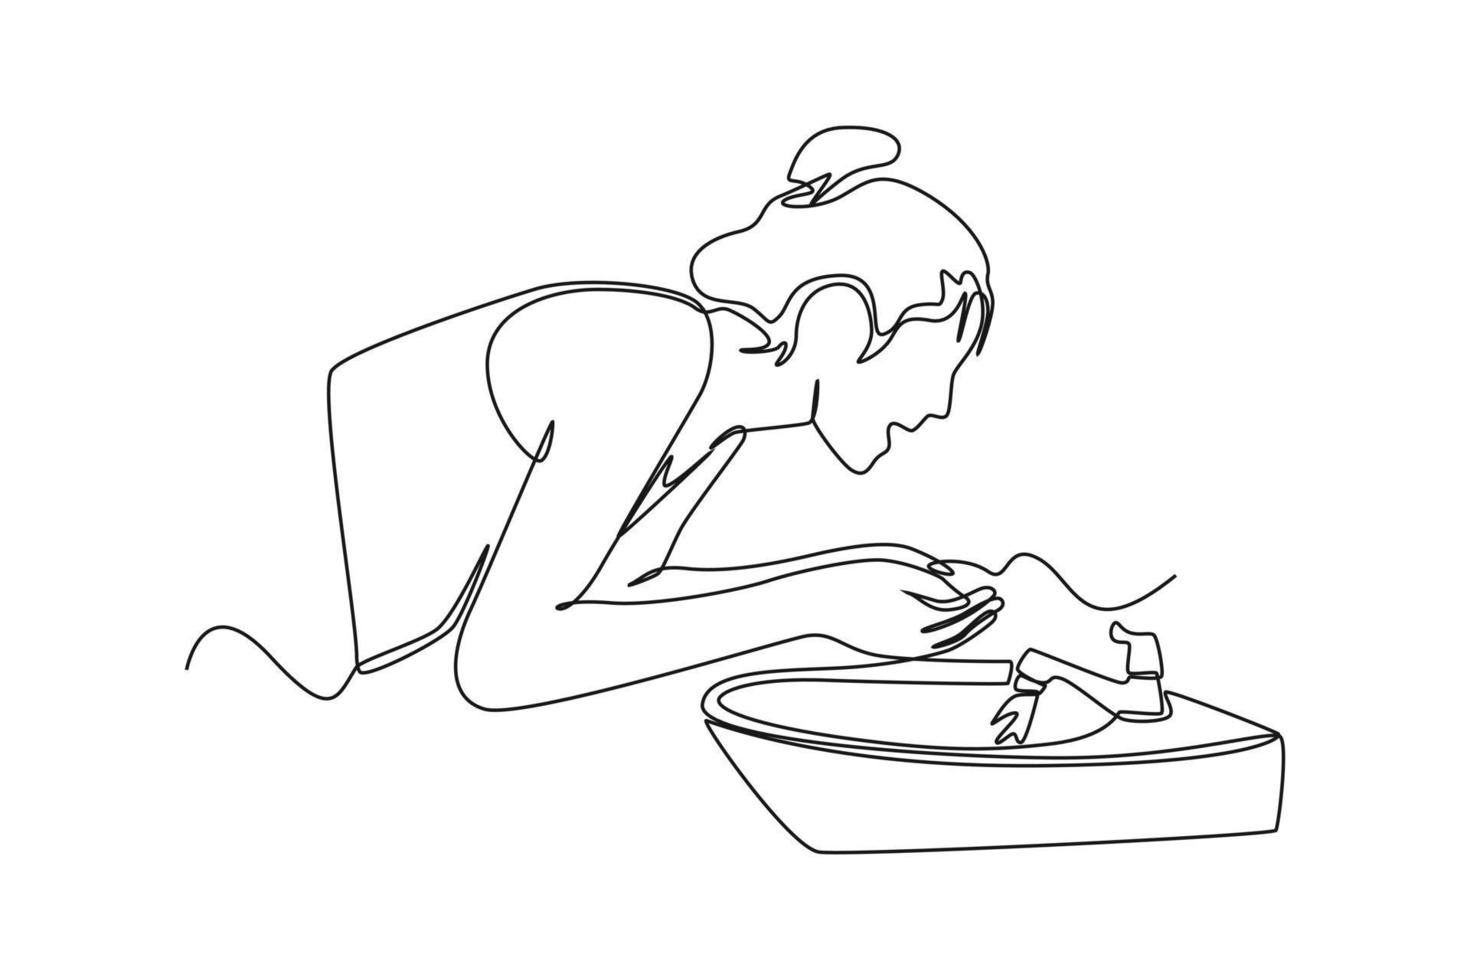 Single one line drawing happy woman washing her face with water. Bathroom activities concept. Continuous line draw design graphic vector illustration.